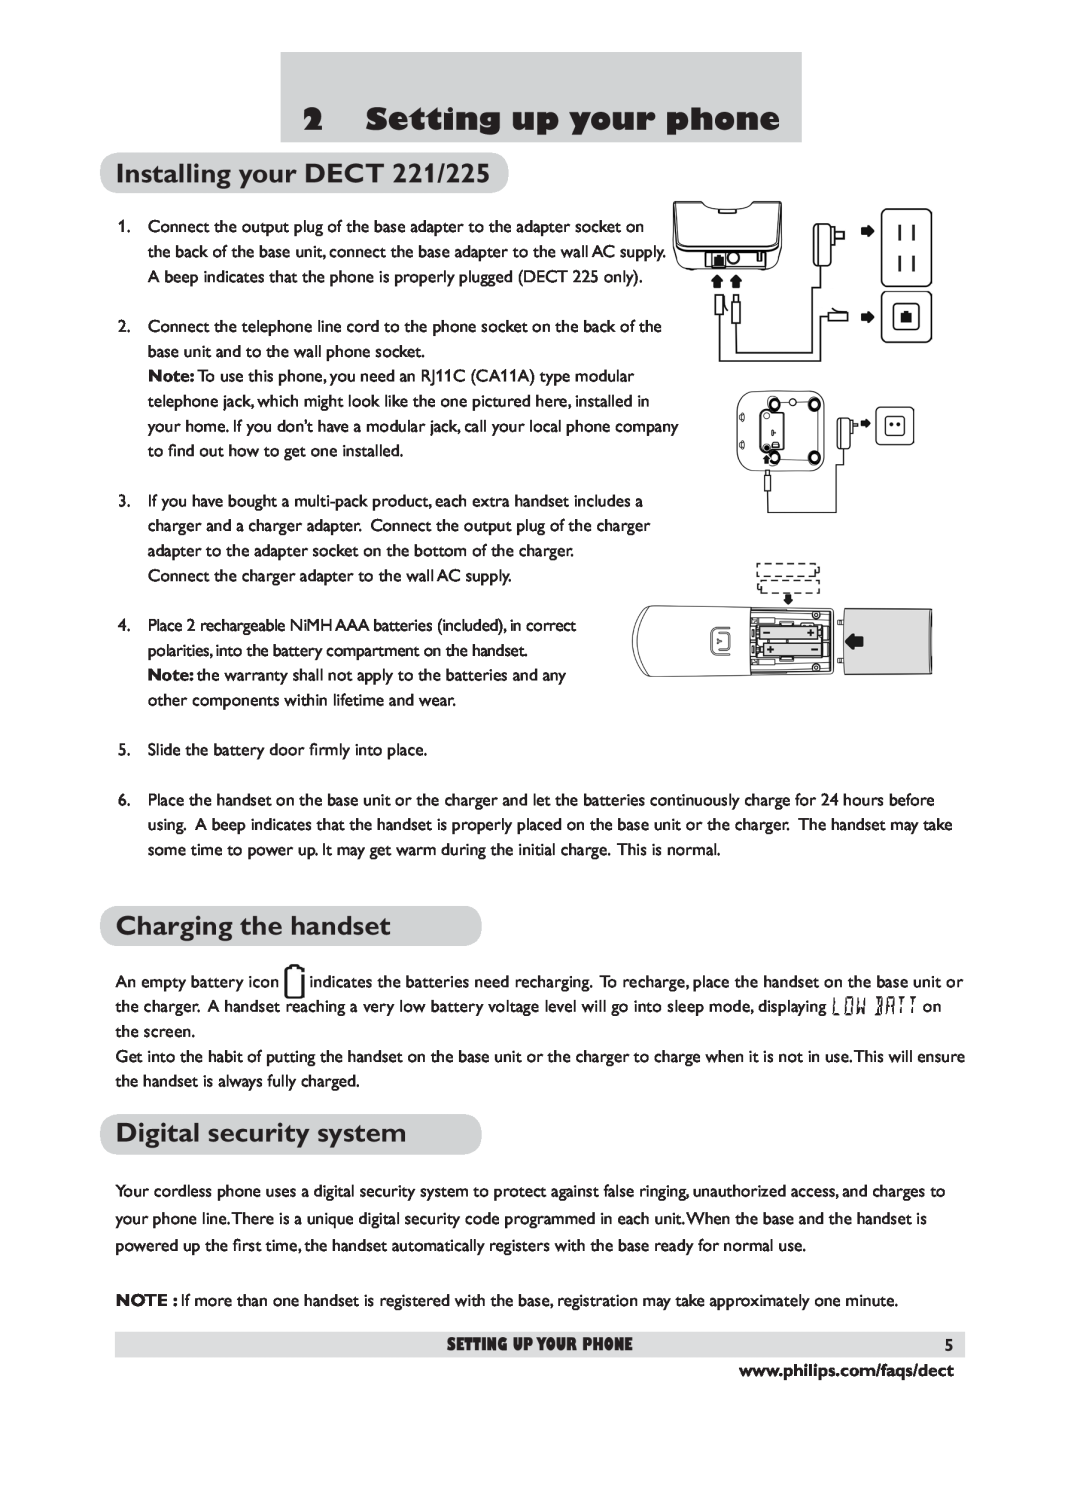 Philips user manual Setting up your phone, Installing your DECT 221/225, Charging the handset, Digital security system 